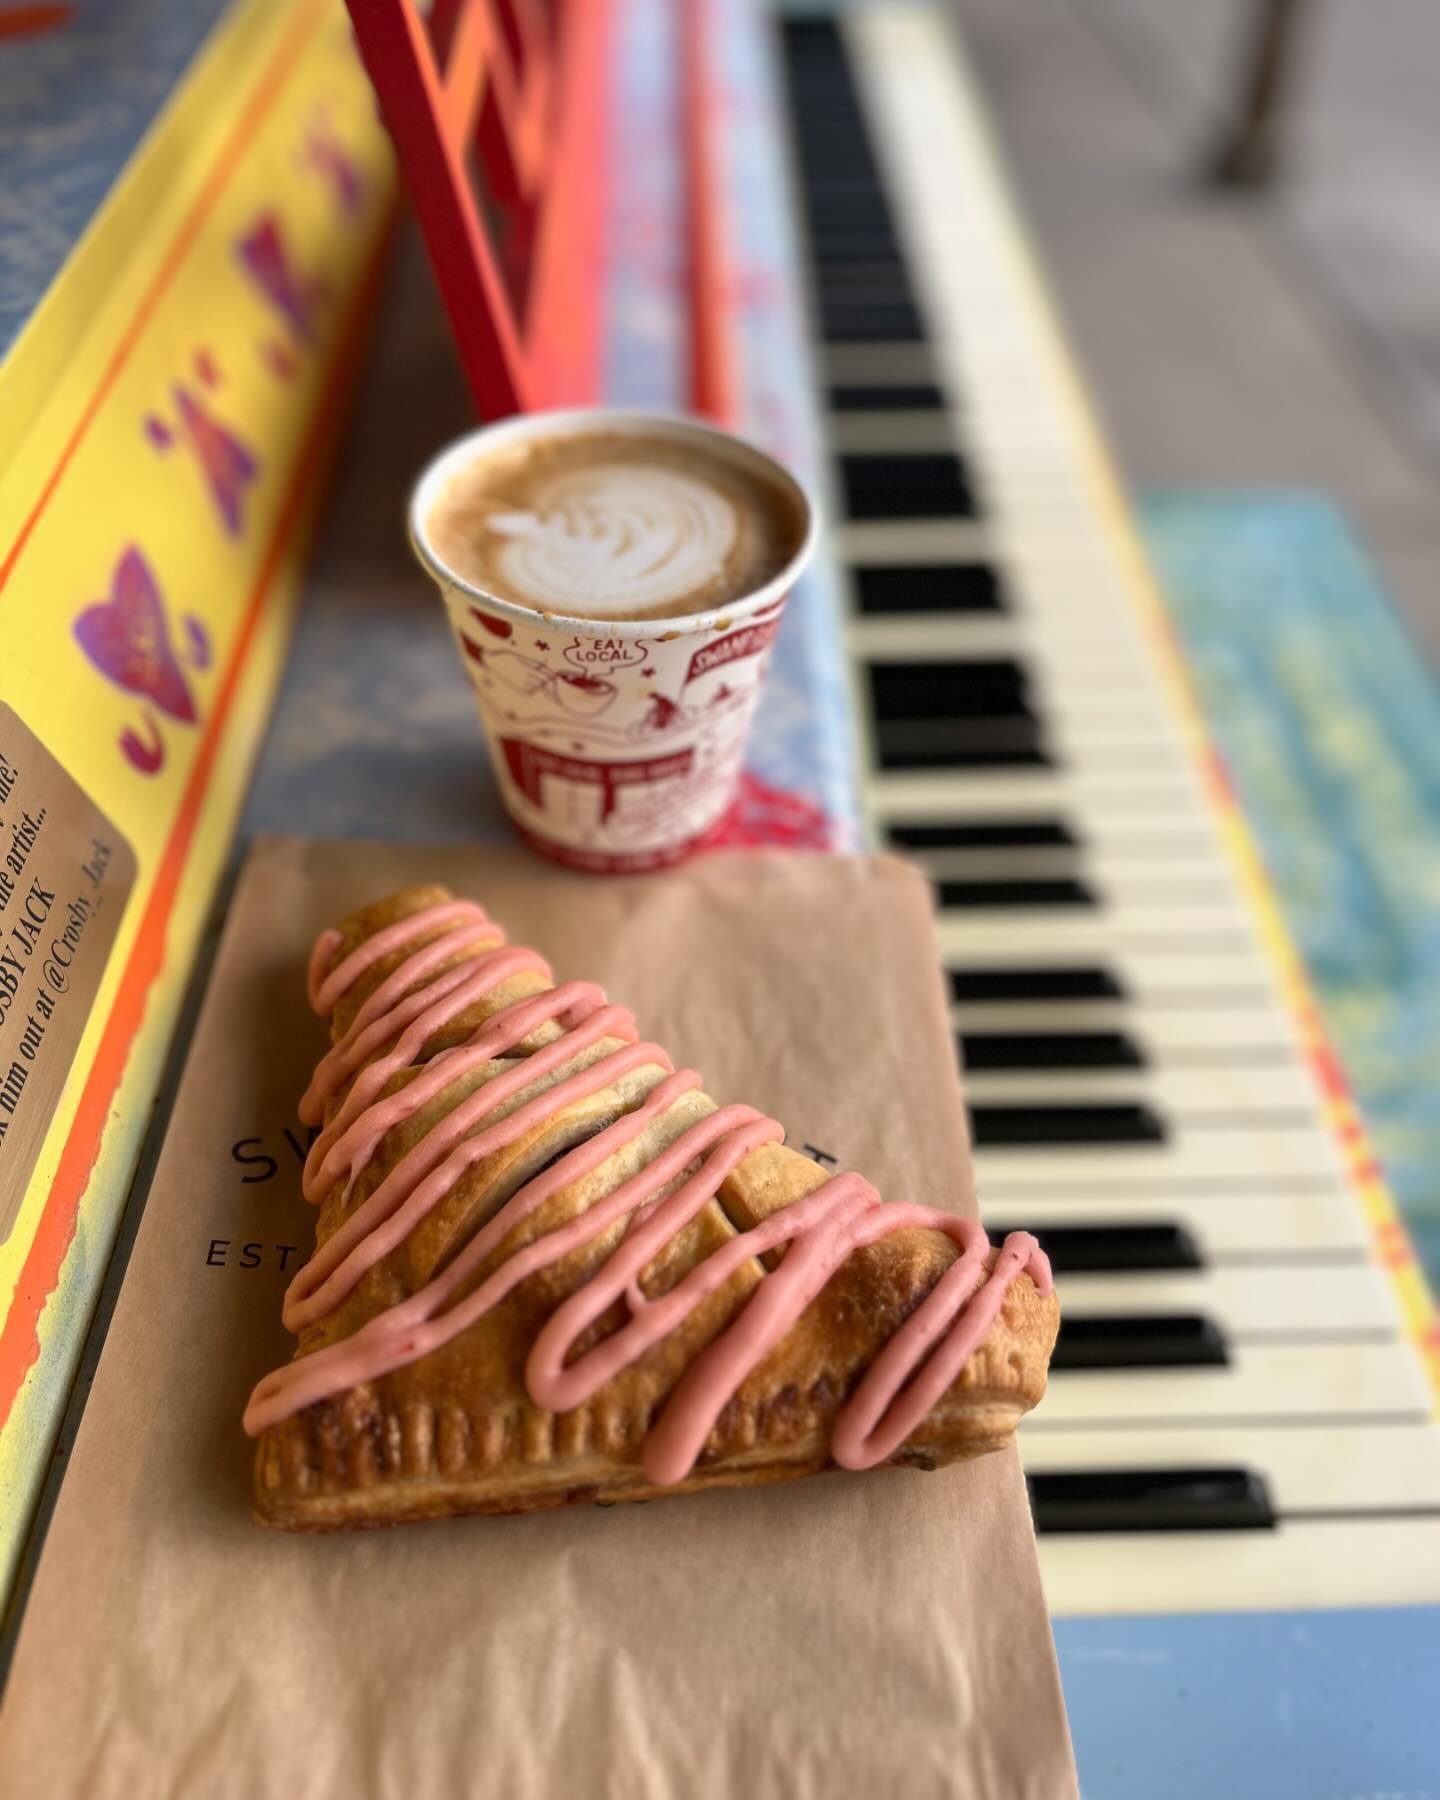 Wherever you go. Whatever you do. We will be right here waiting for you. With strawberry hand pies. Until we sell out, after that it&rsquo;ll just be us.